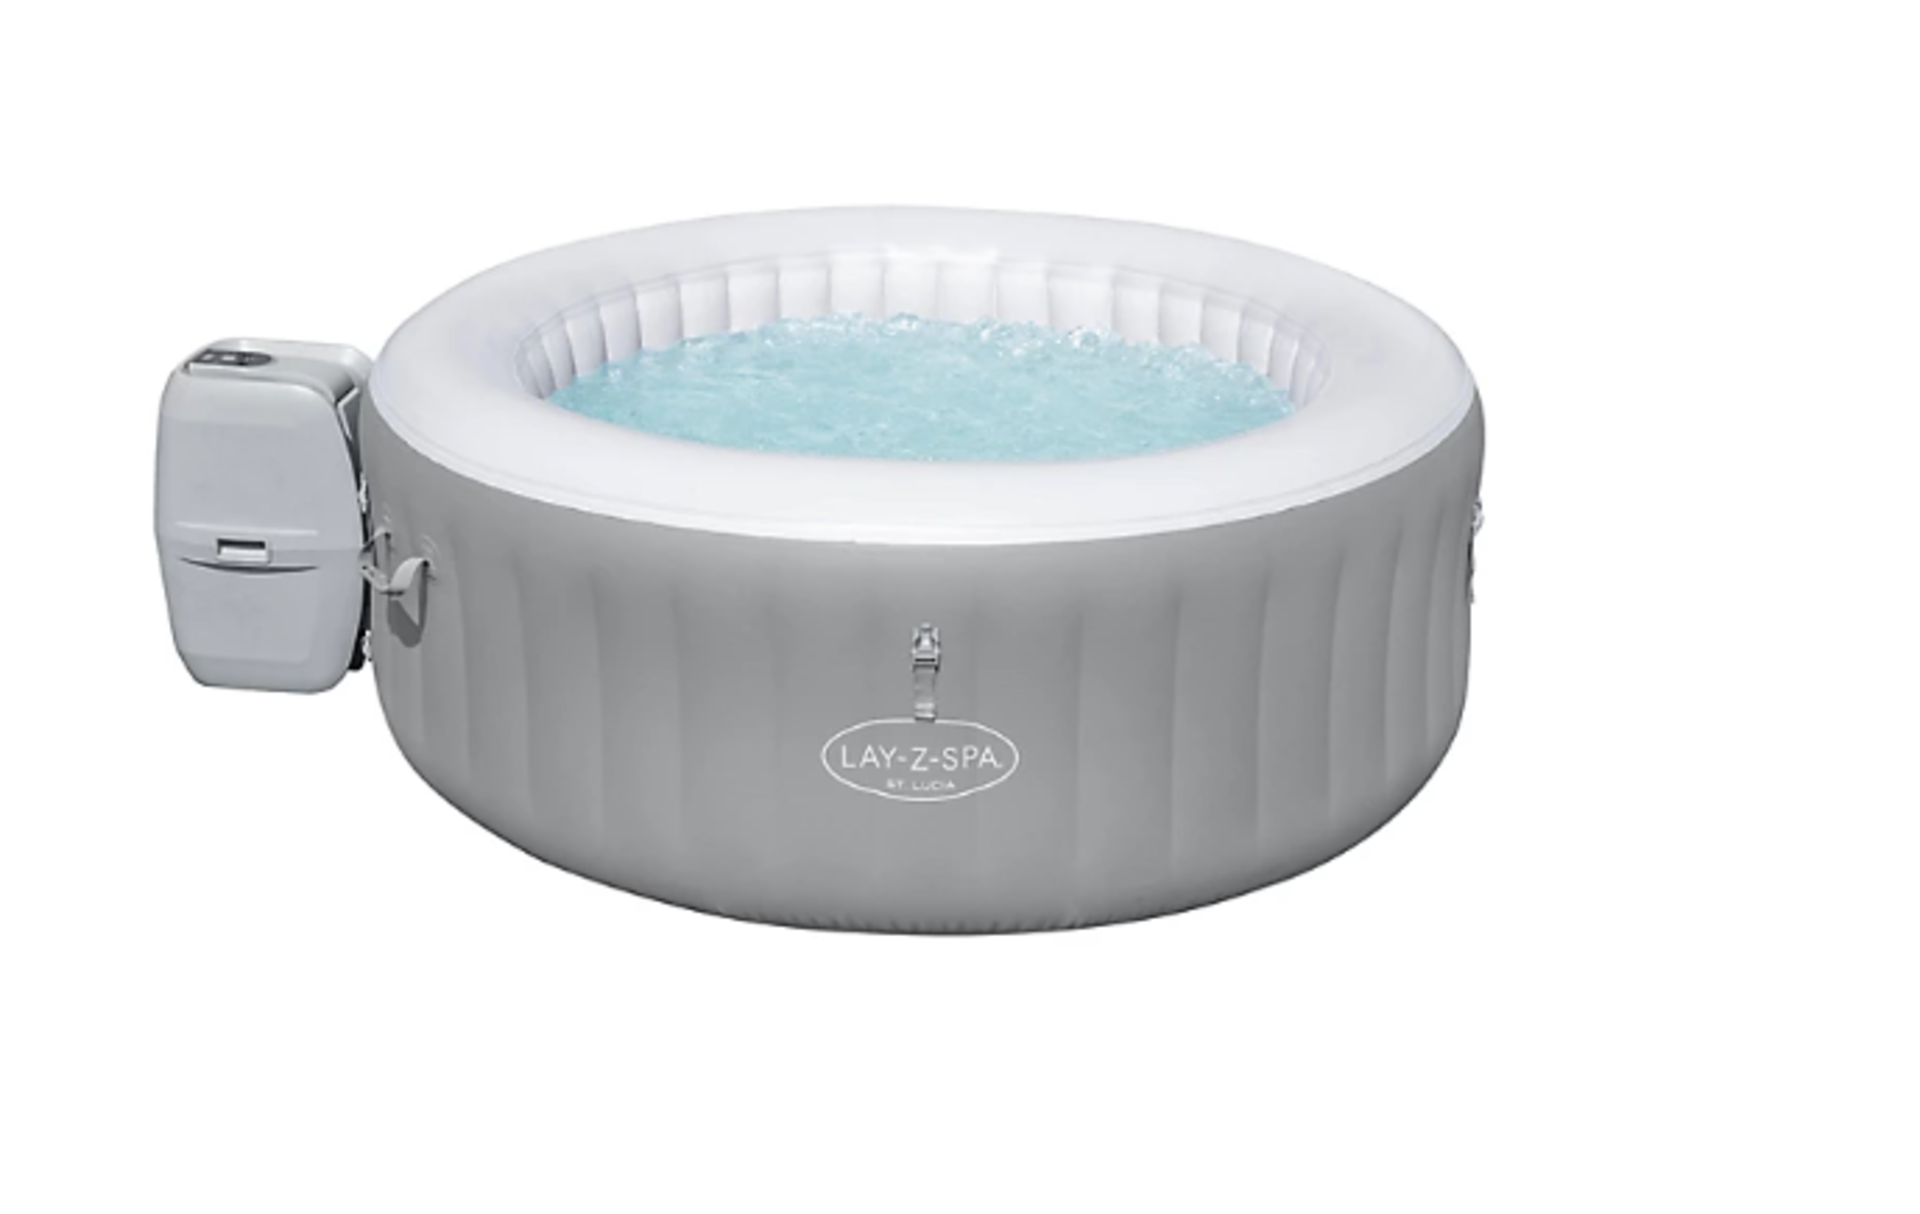 Lay-Z-Spa St.Lucia 3 person Inflatable Hot Tub. - ER. RRP £405.00. The Lay-Z-Spa St. Lucia AirJet™